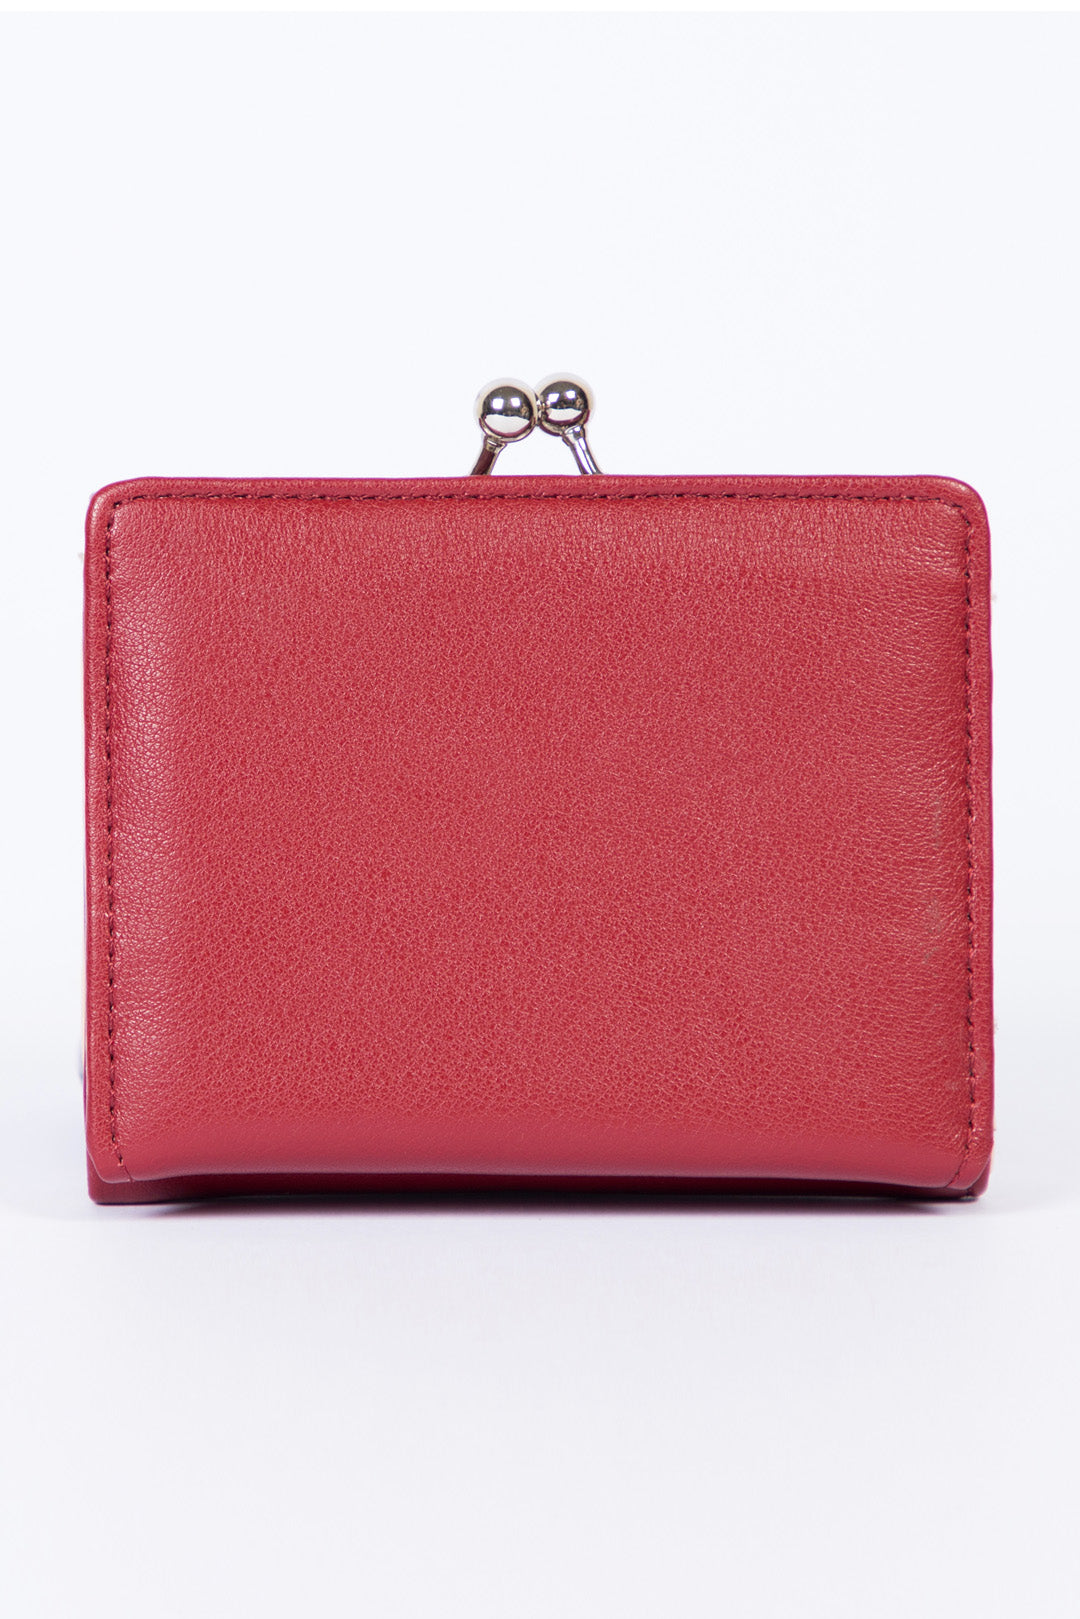 Red Bag - W3012